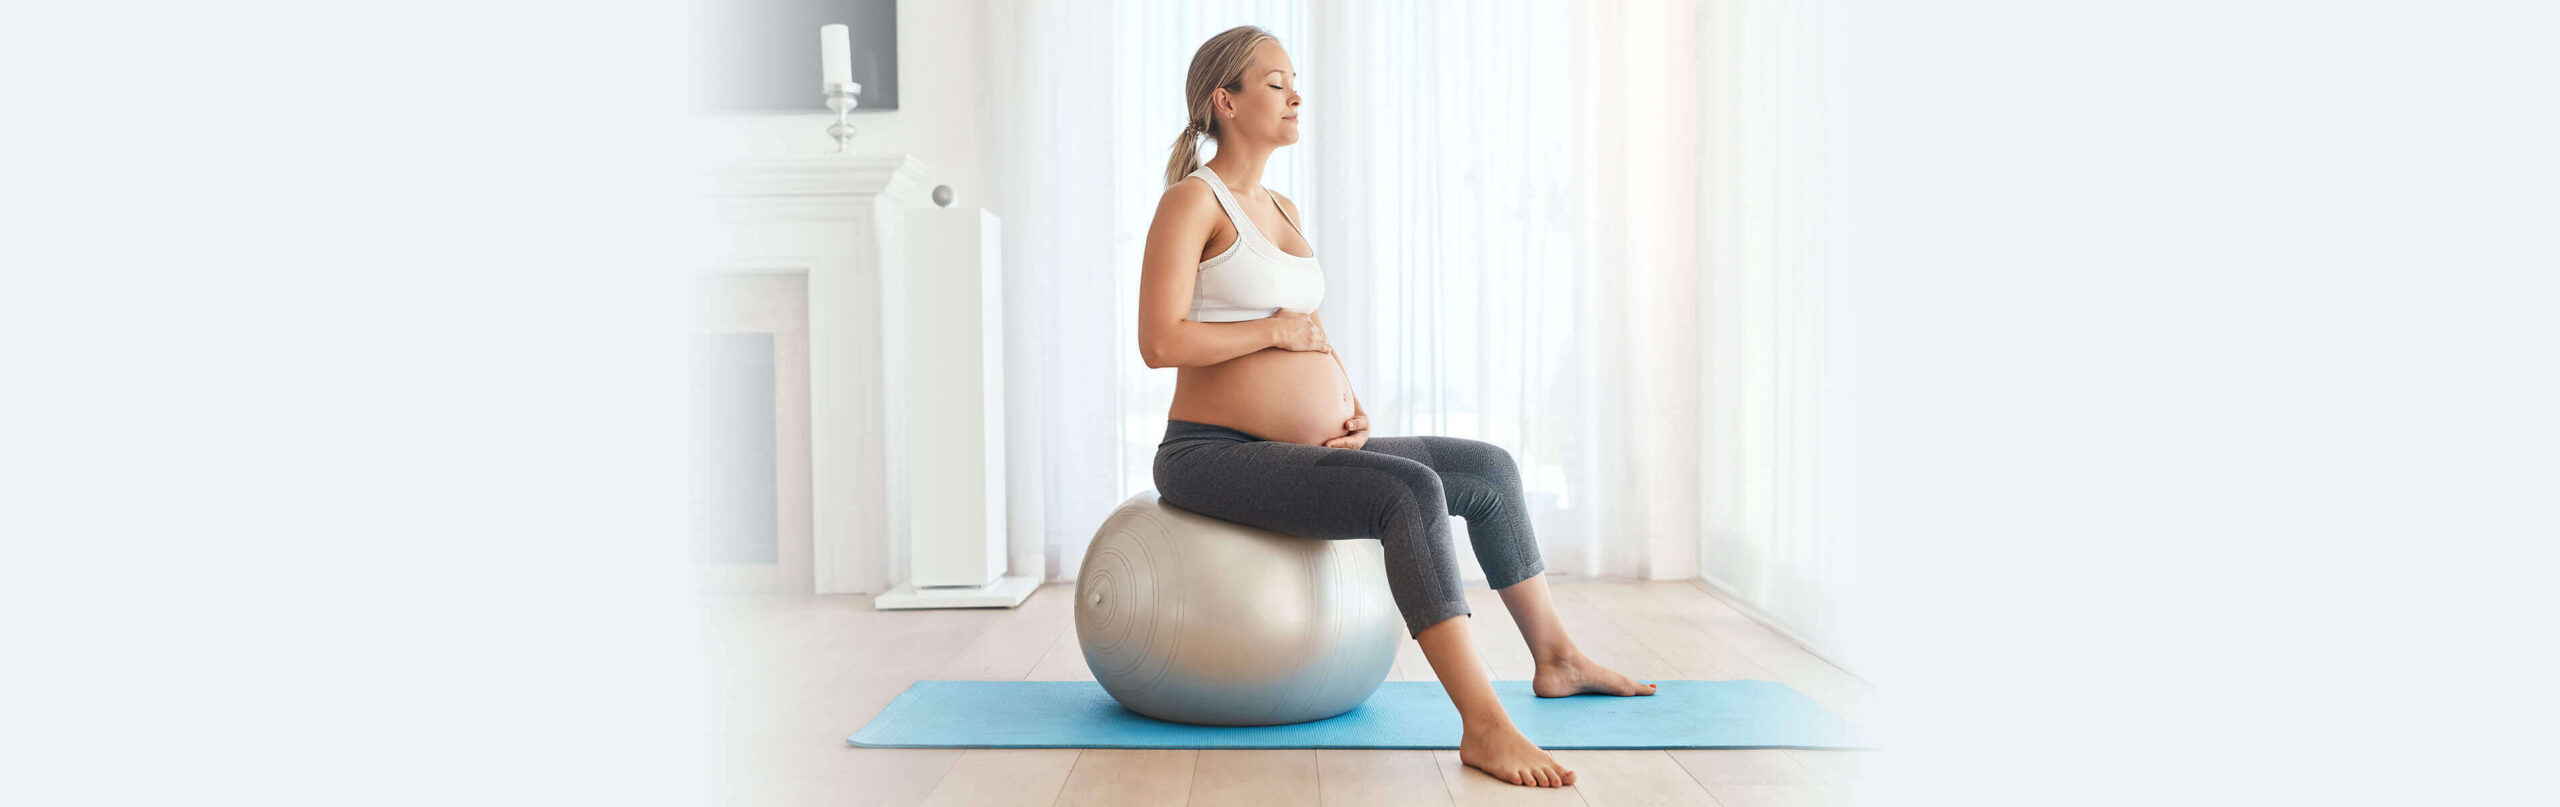 pregnant woman managing labour pain by sitting on an exercise ball holding her belly with eyes closed